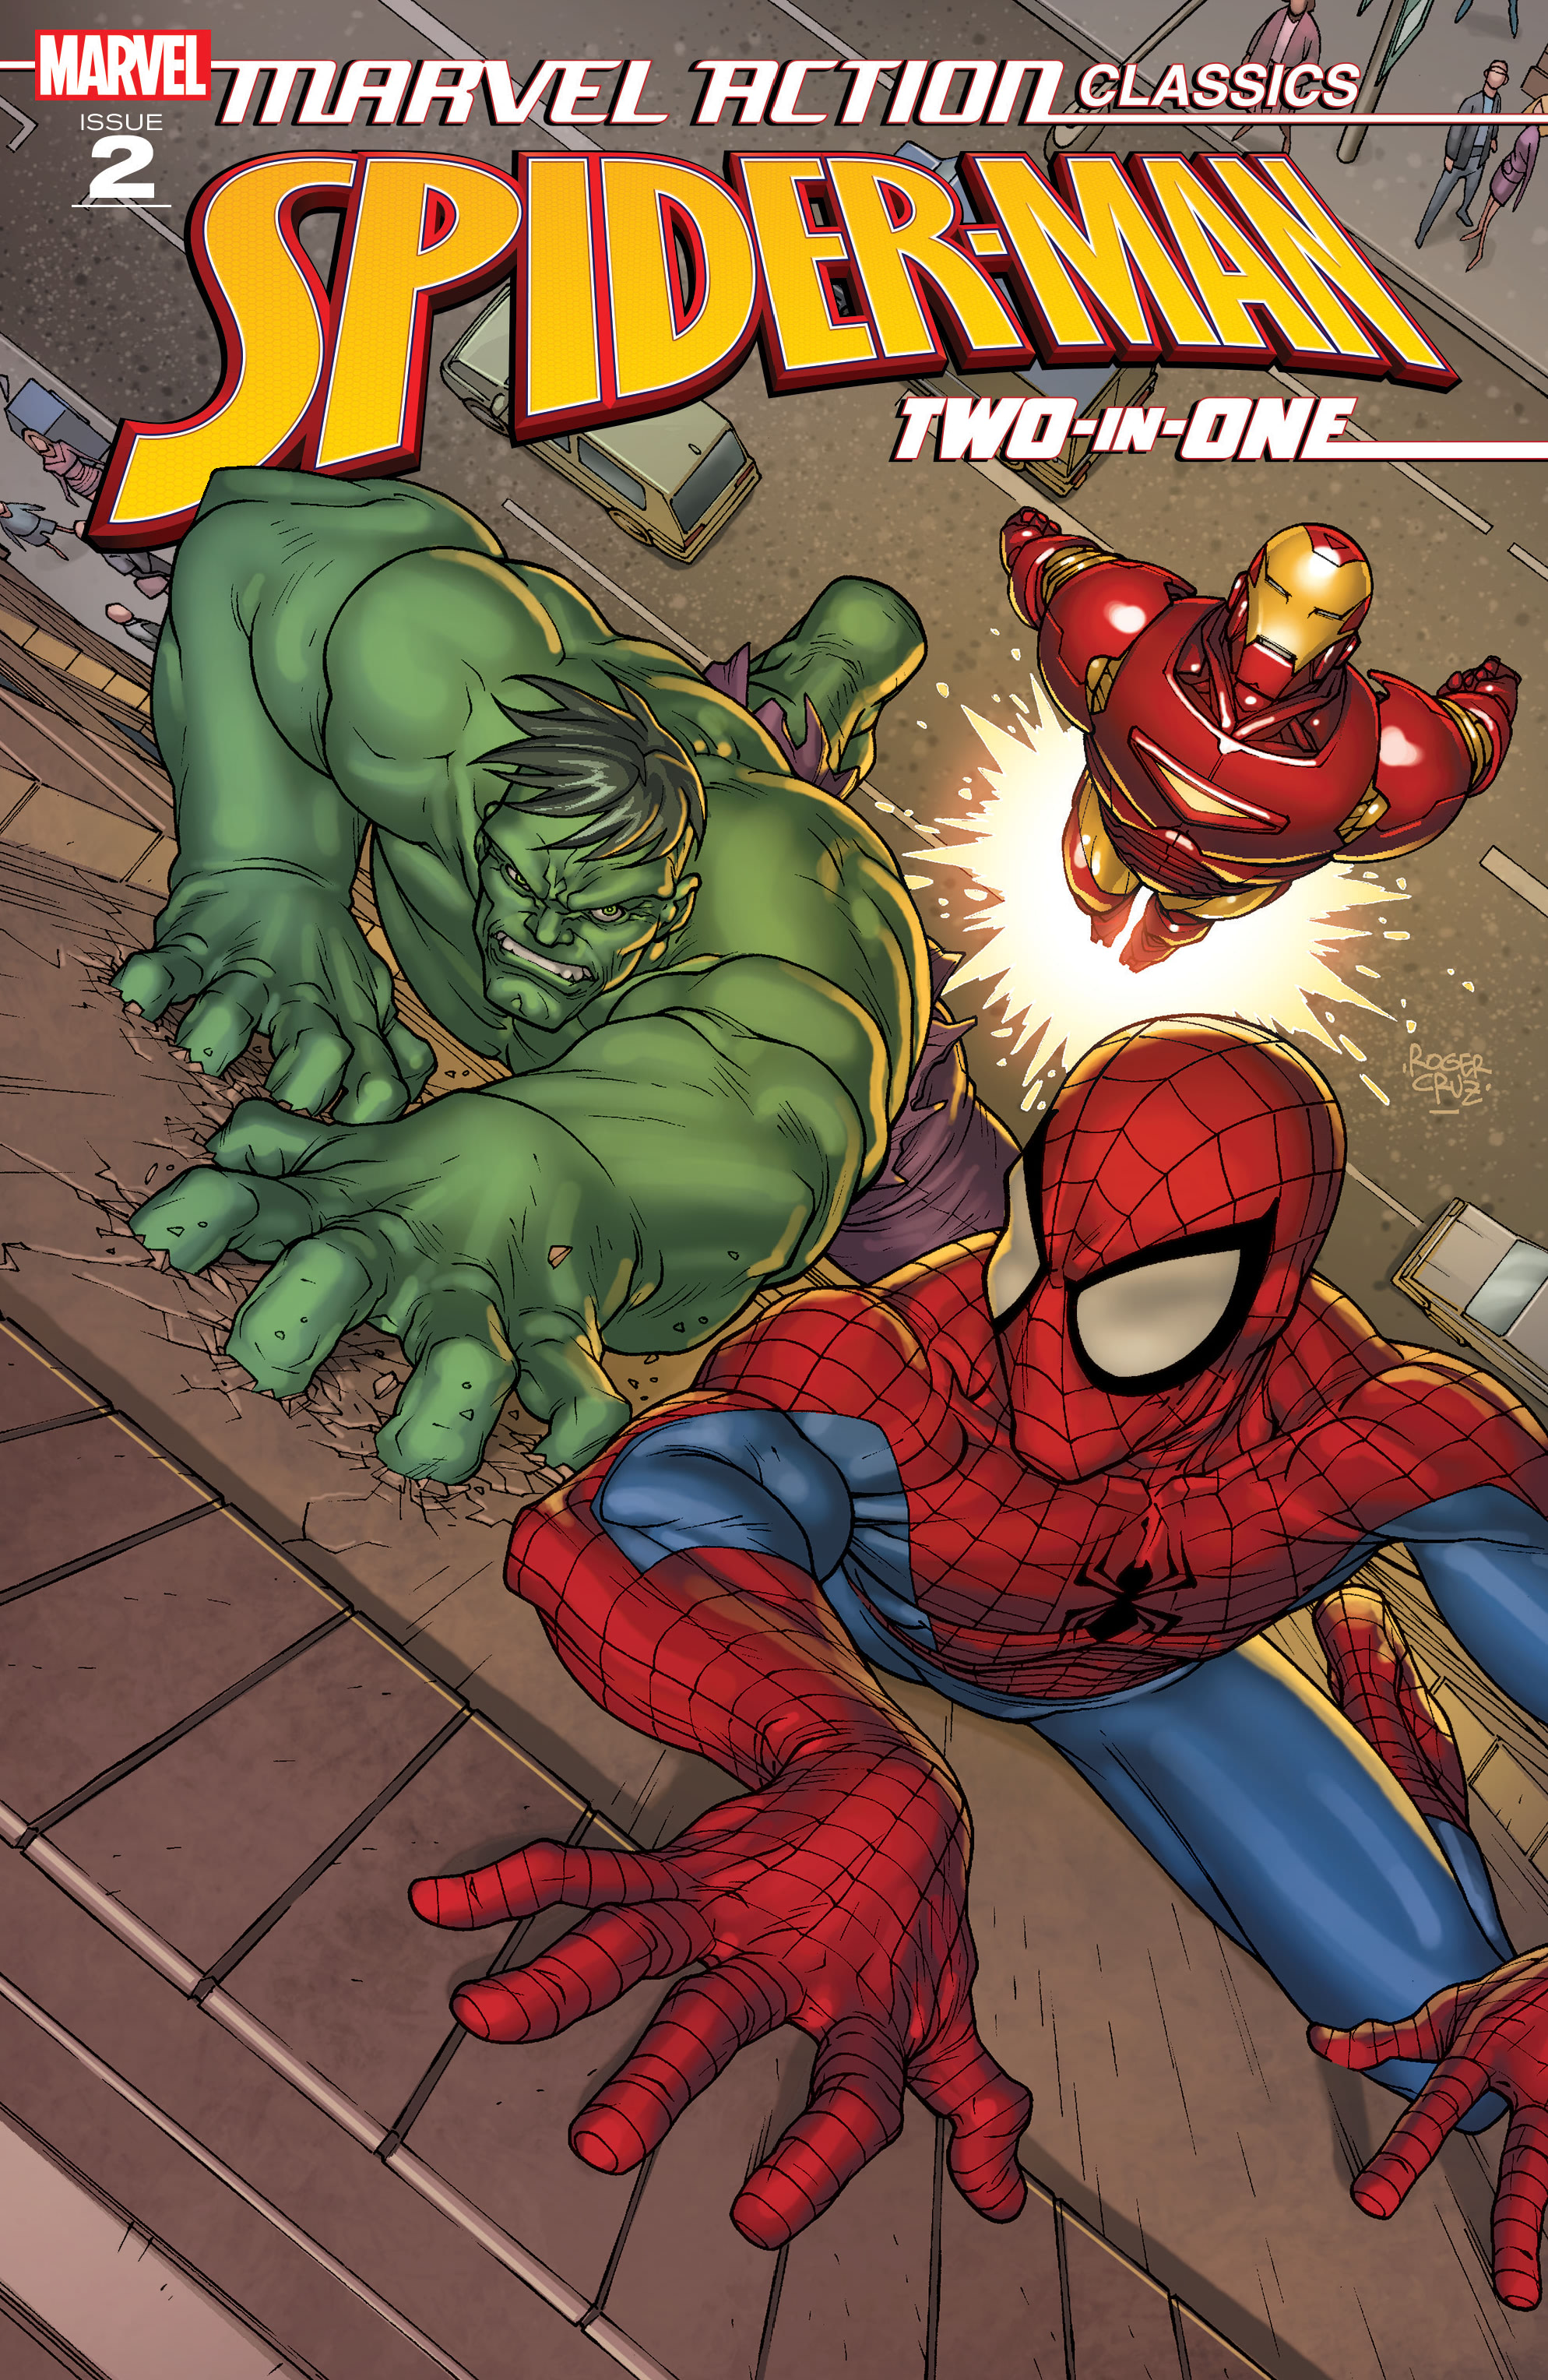 Marvel Action Classics: Spider-Man Two-In-One (2019): Chapter 2 - Page 1